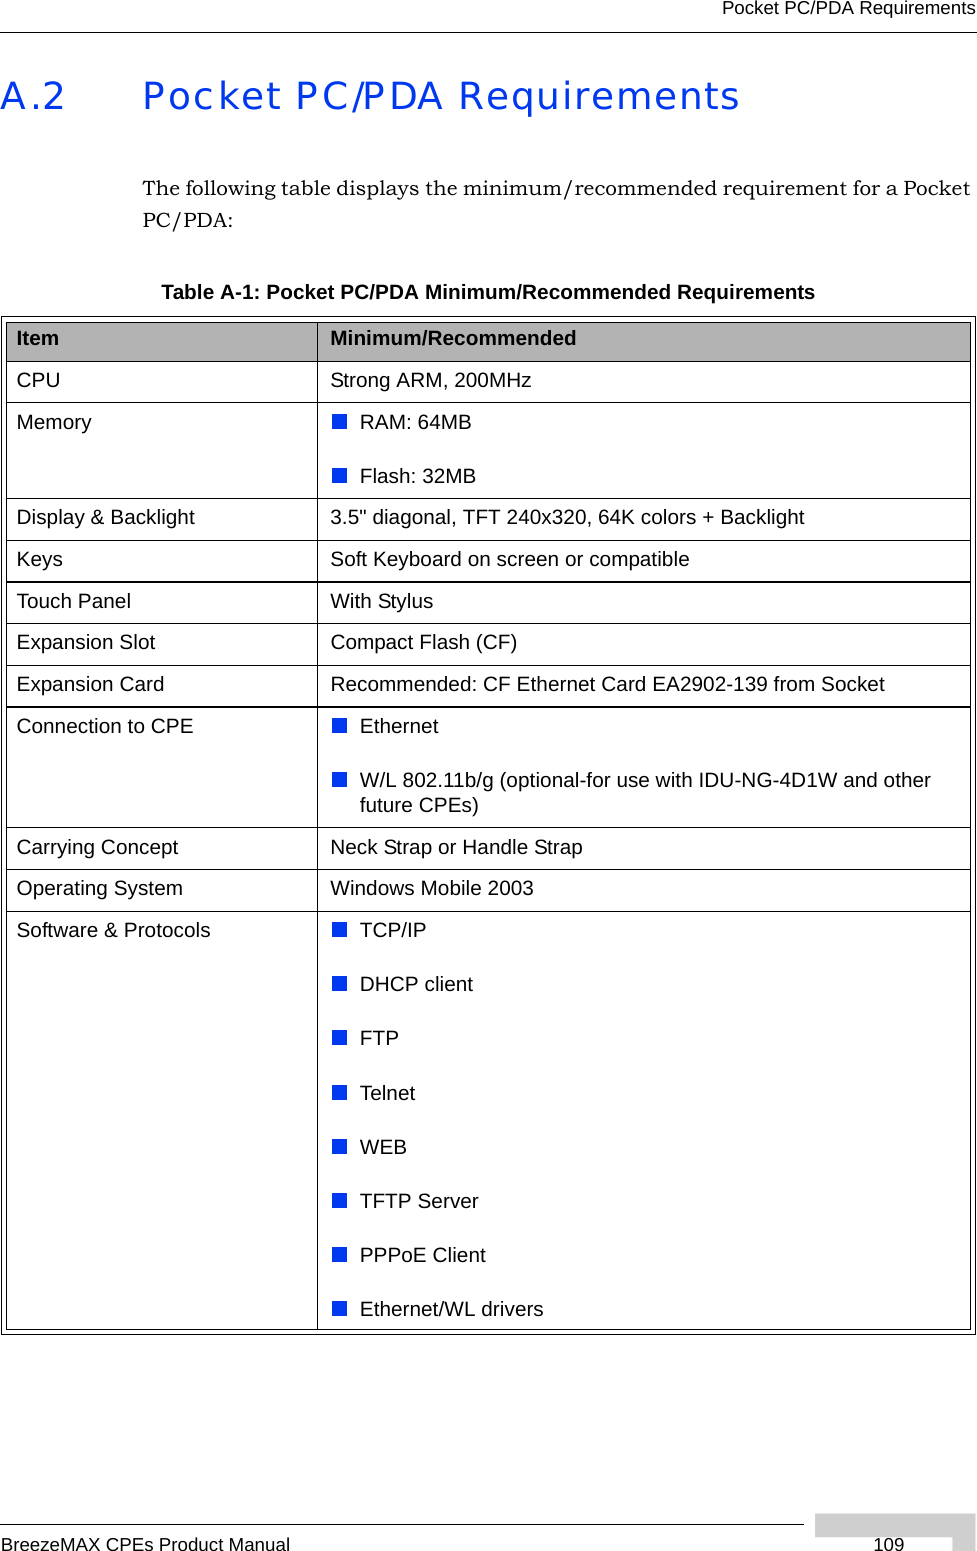 Pocket PC/PDA RequirementsBreezeMAX CPEs Product Manual  109A.2 Pocket PC/PDA RequirementsThe following table displays the minimum/recommended requirement for a Pocket PC/PDA:Table A-1: Pocket PC/PDA Minimum/Recommended RequirementsItem Minimum/RecommendedCPU Strong ARM, 200MHzMemory RAM: 64MBFlash: 32MBDisplay &amp; Backlight 3.5&quot; diagonal, TFT 240x320, 64K colors + BacklightKeys Soft Keyboard on screen or compatibleTouch Panel With StylusExpansion Slot Compact Flash (CF)Expansion Card Recommended: CF Ethernet Card EA2902-139 from SocketConnection to CPE EthernetW/L 802.11b/g (optional-for use with IDU-NG-4D1W and other future CPEs)Carrying Concept Neck Strap or Handle StrapOperating System Windows Mobile 2003Software &amp; Protocols TCP/IPDHCP clientFTPTelnetWEBTFTP ServerPPPoE ClientEthernet/WL drivers